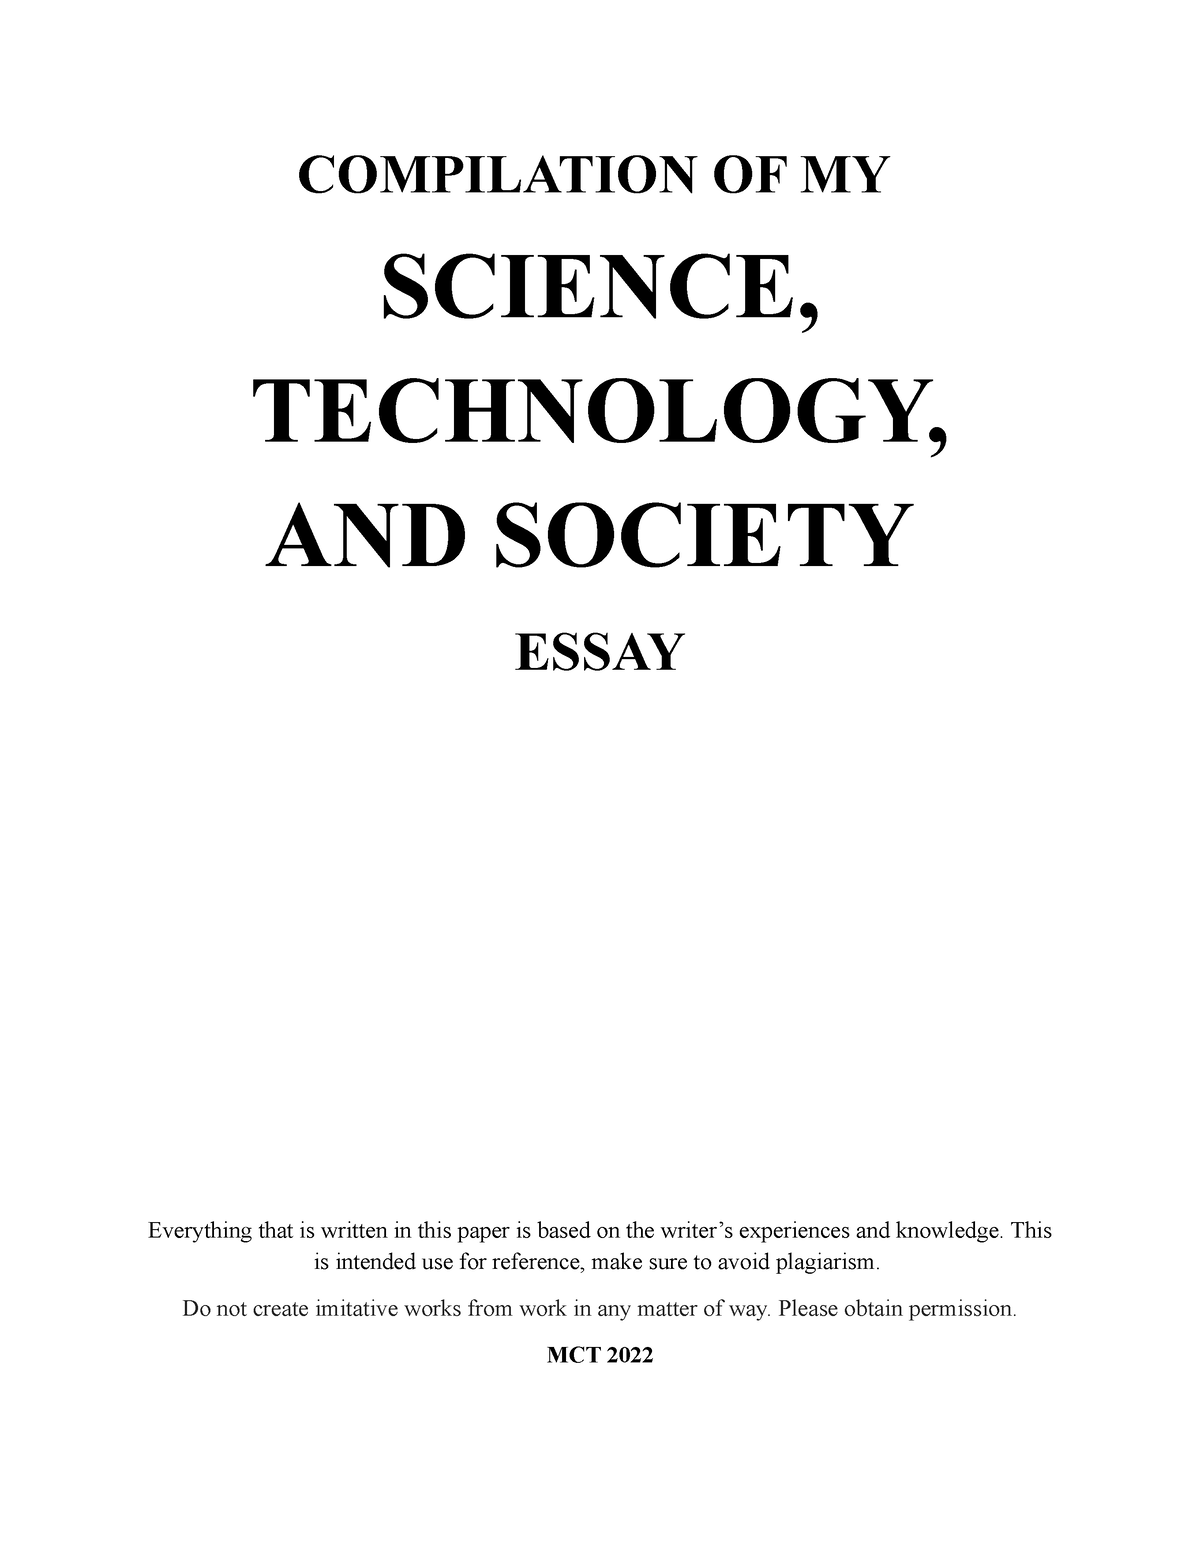 the relationship between science technology and society essay